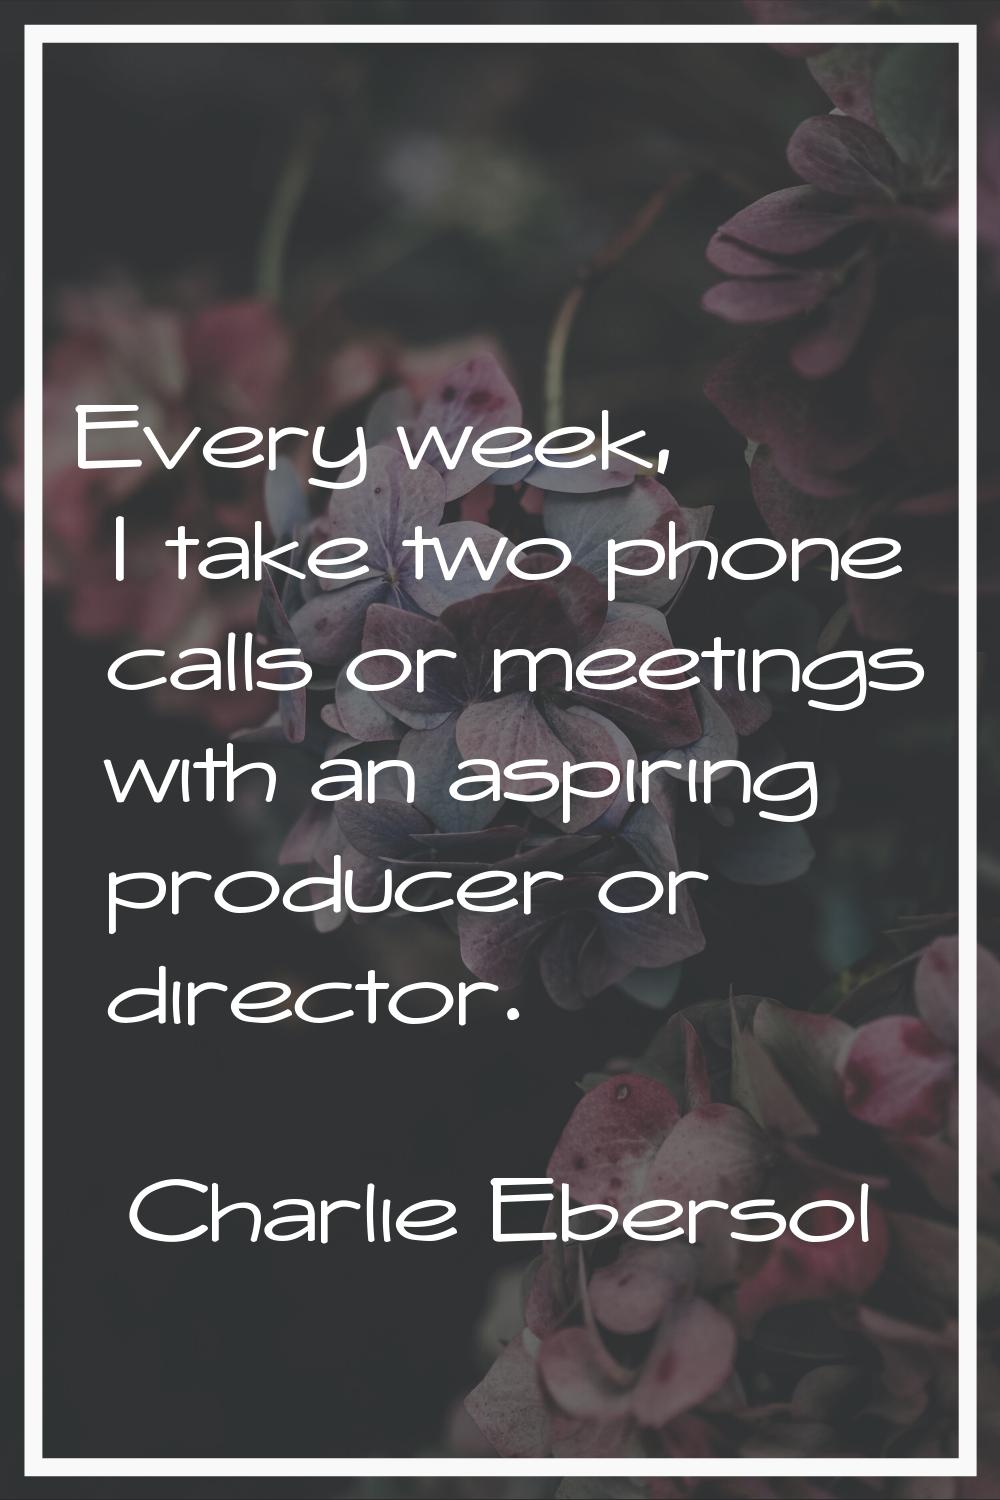 Every week, I take two phone calls or meetings with an aspiring producer or director.